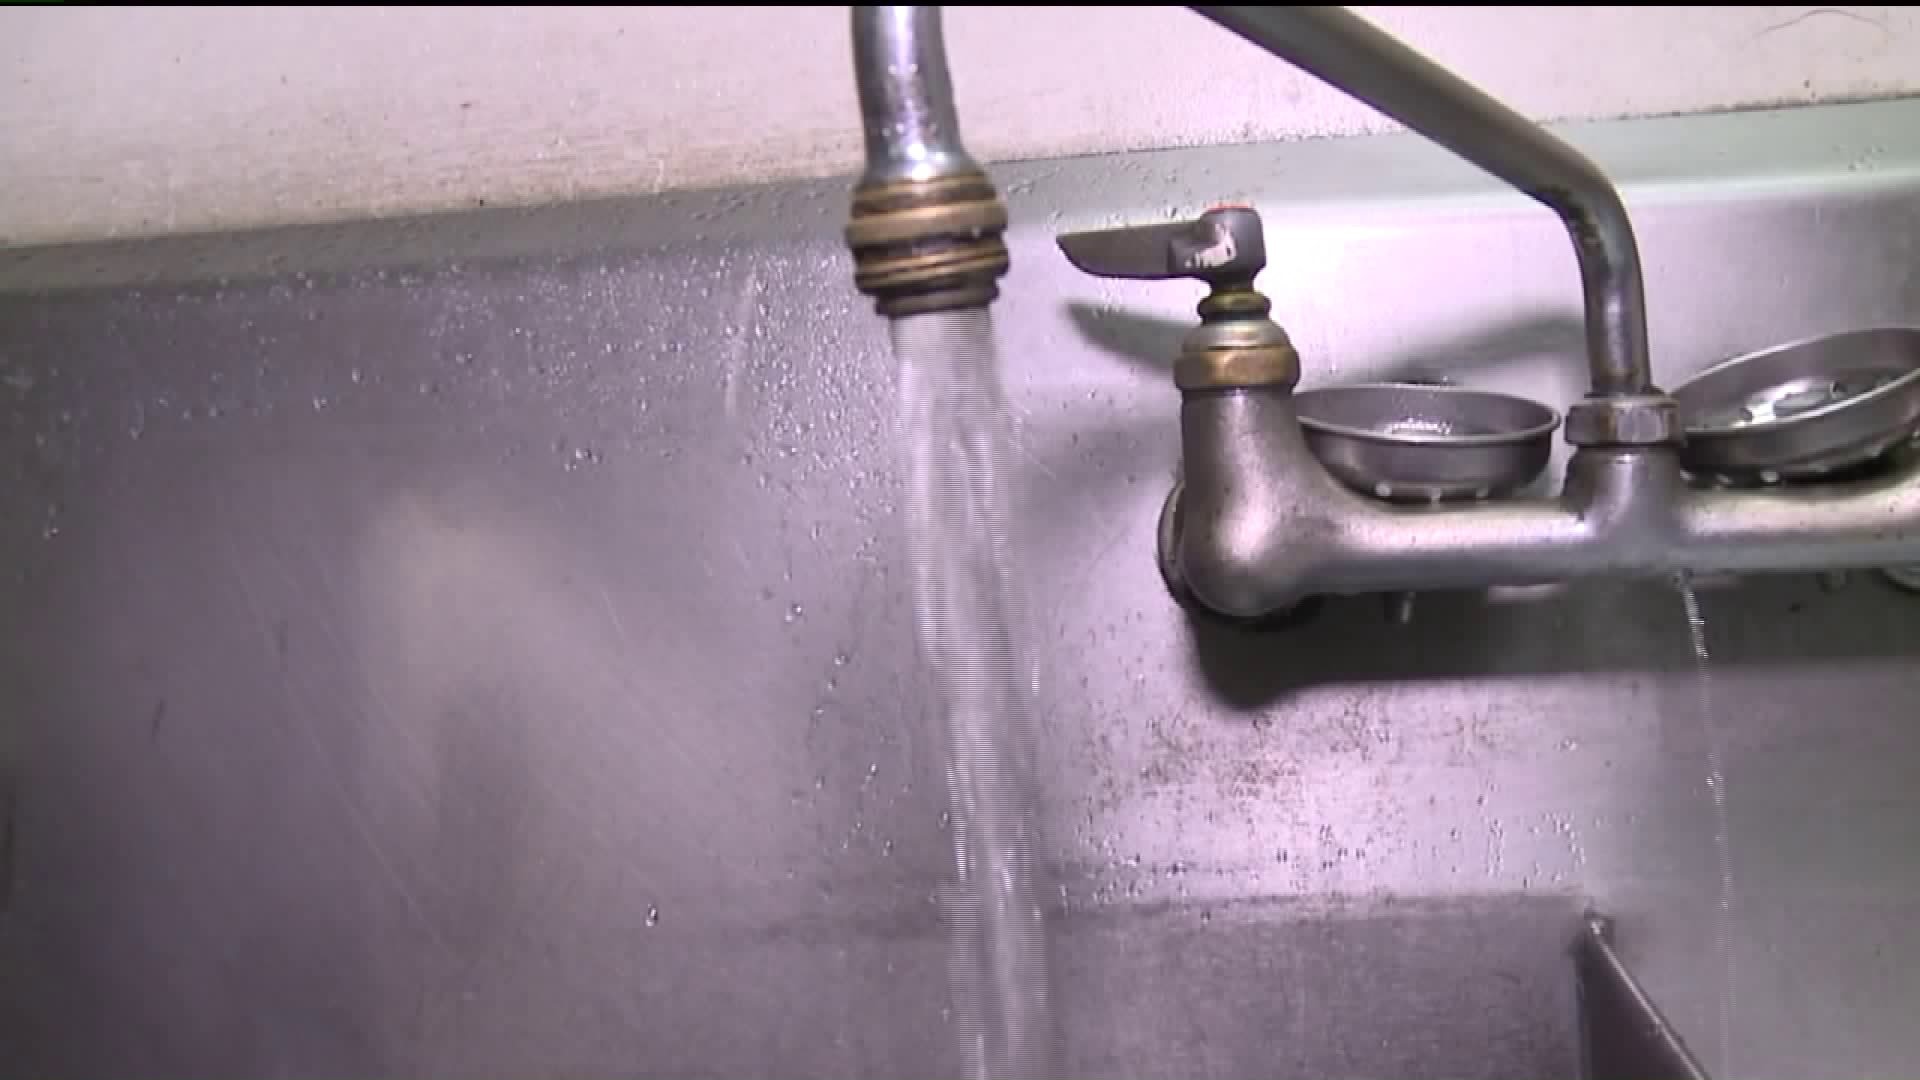 Rate Increase for Water Bill Has Customers Concerned